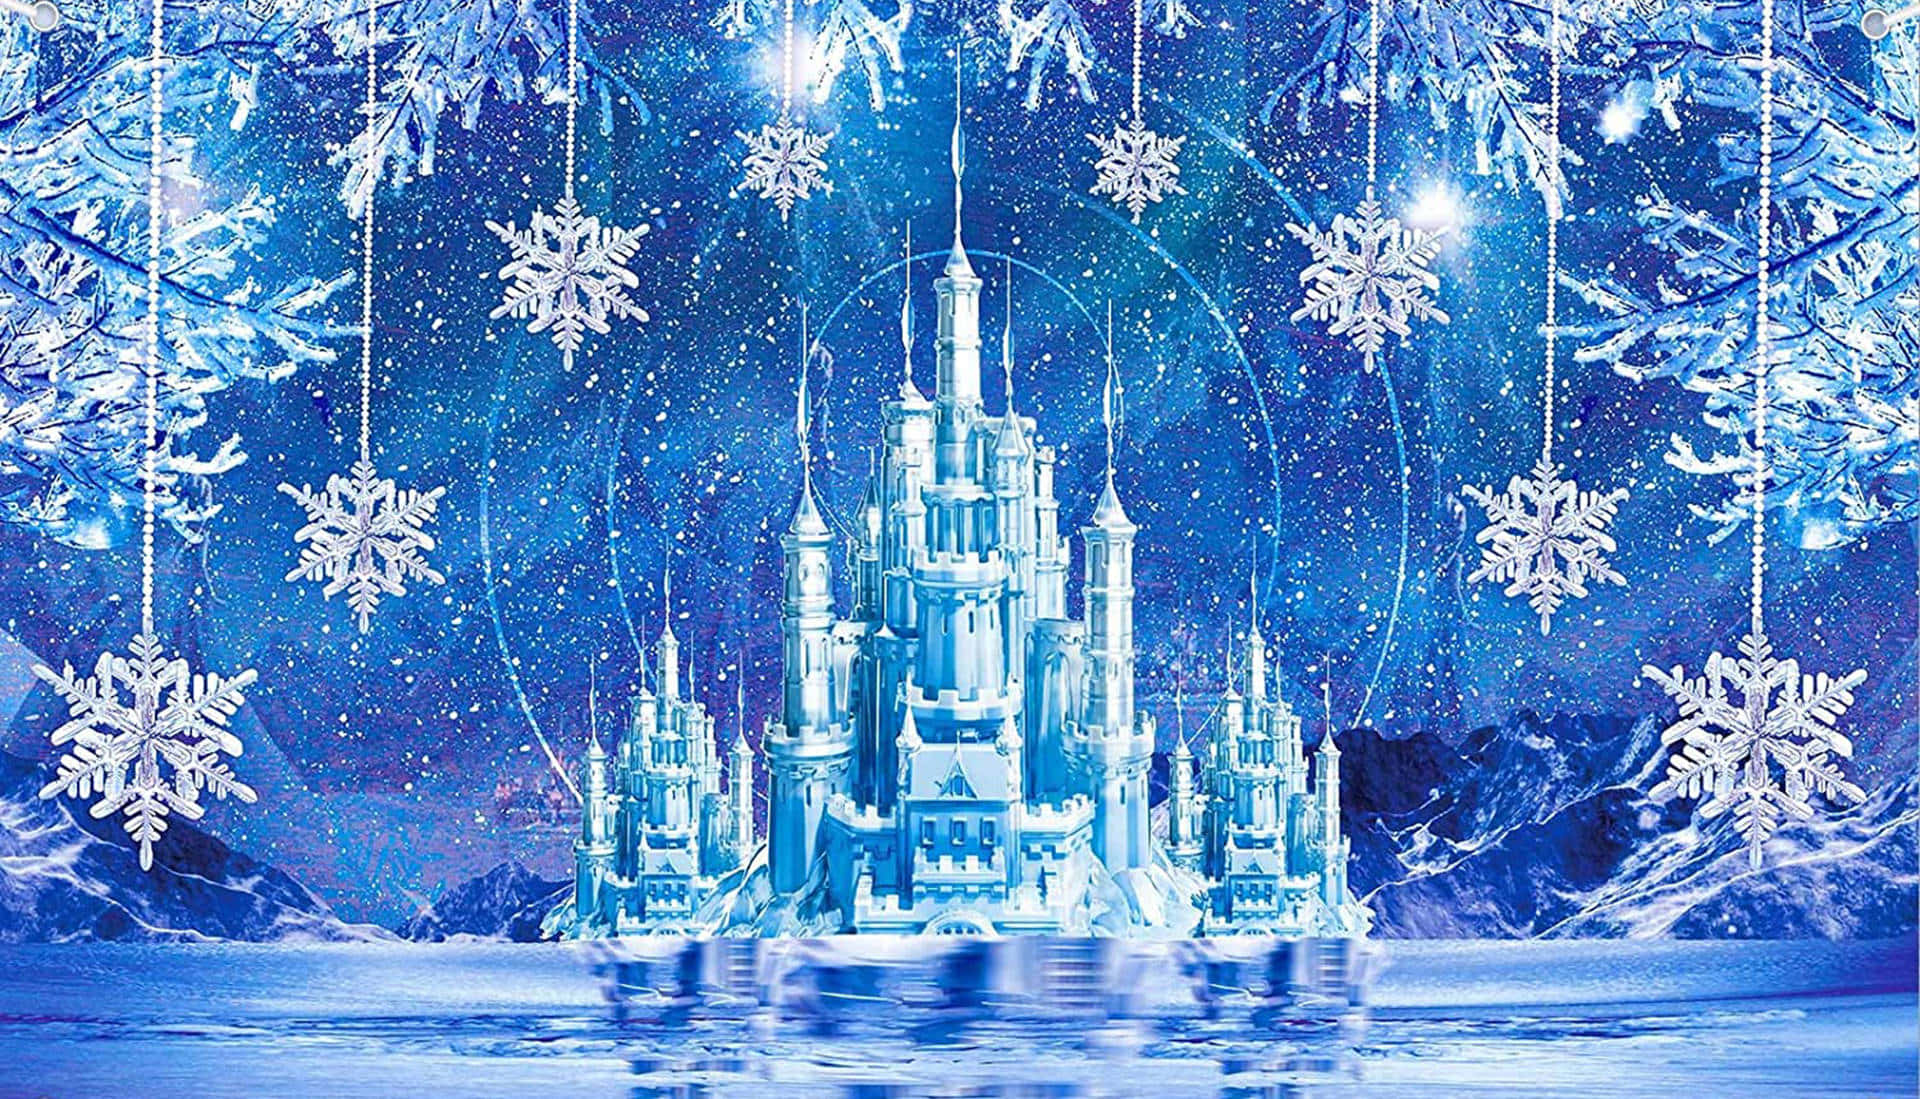 Frozen Castle Enveloped in Ice and Winter Charm